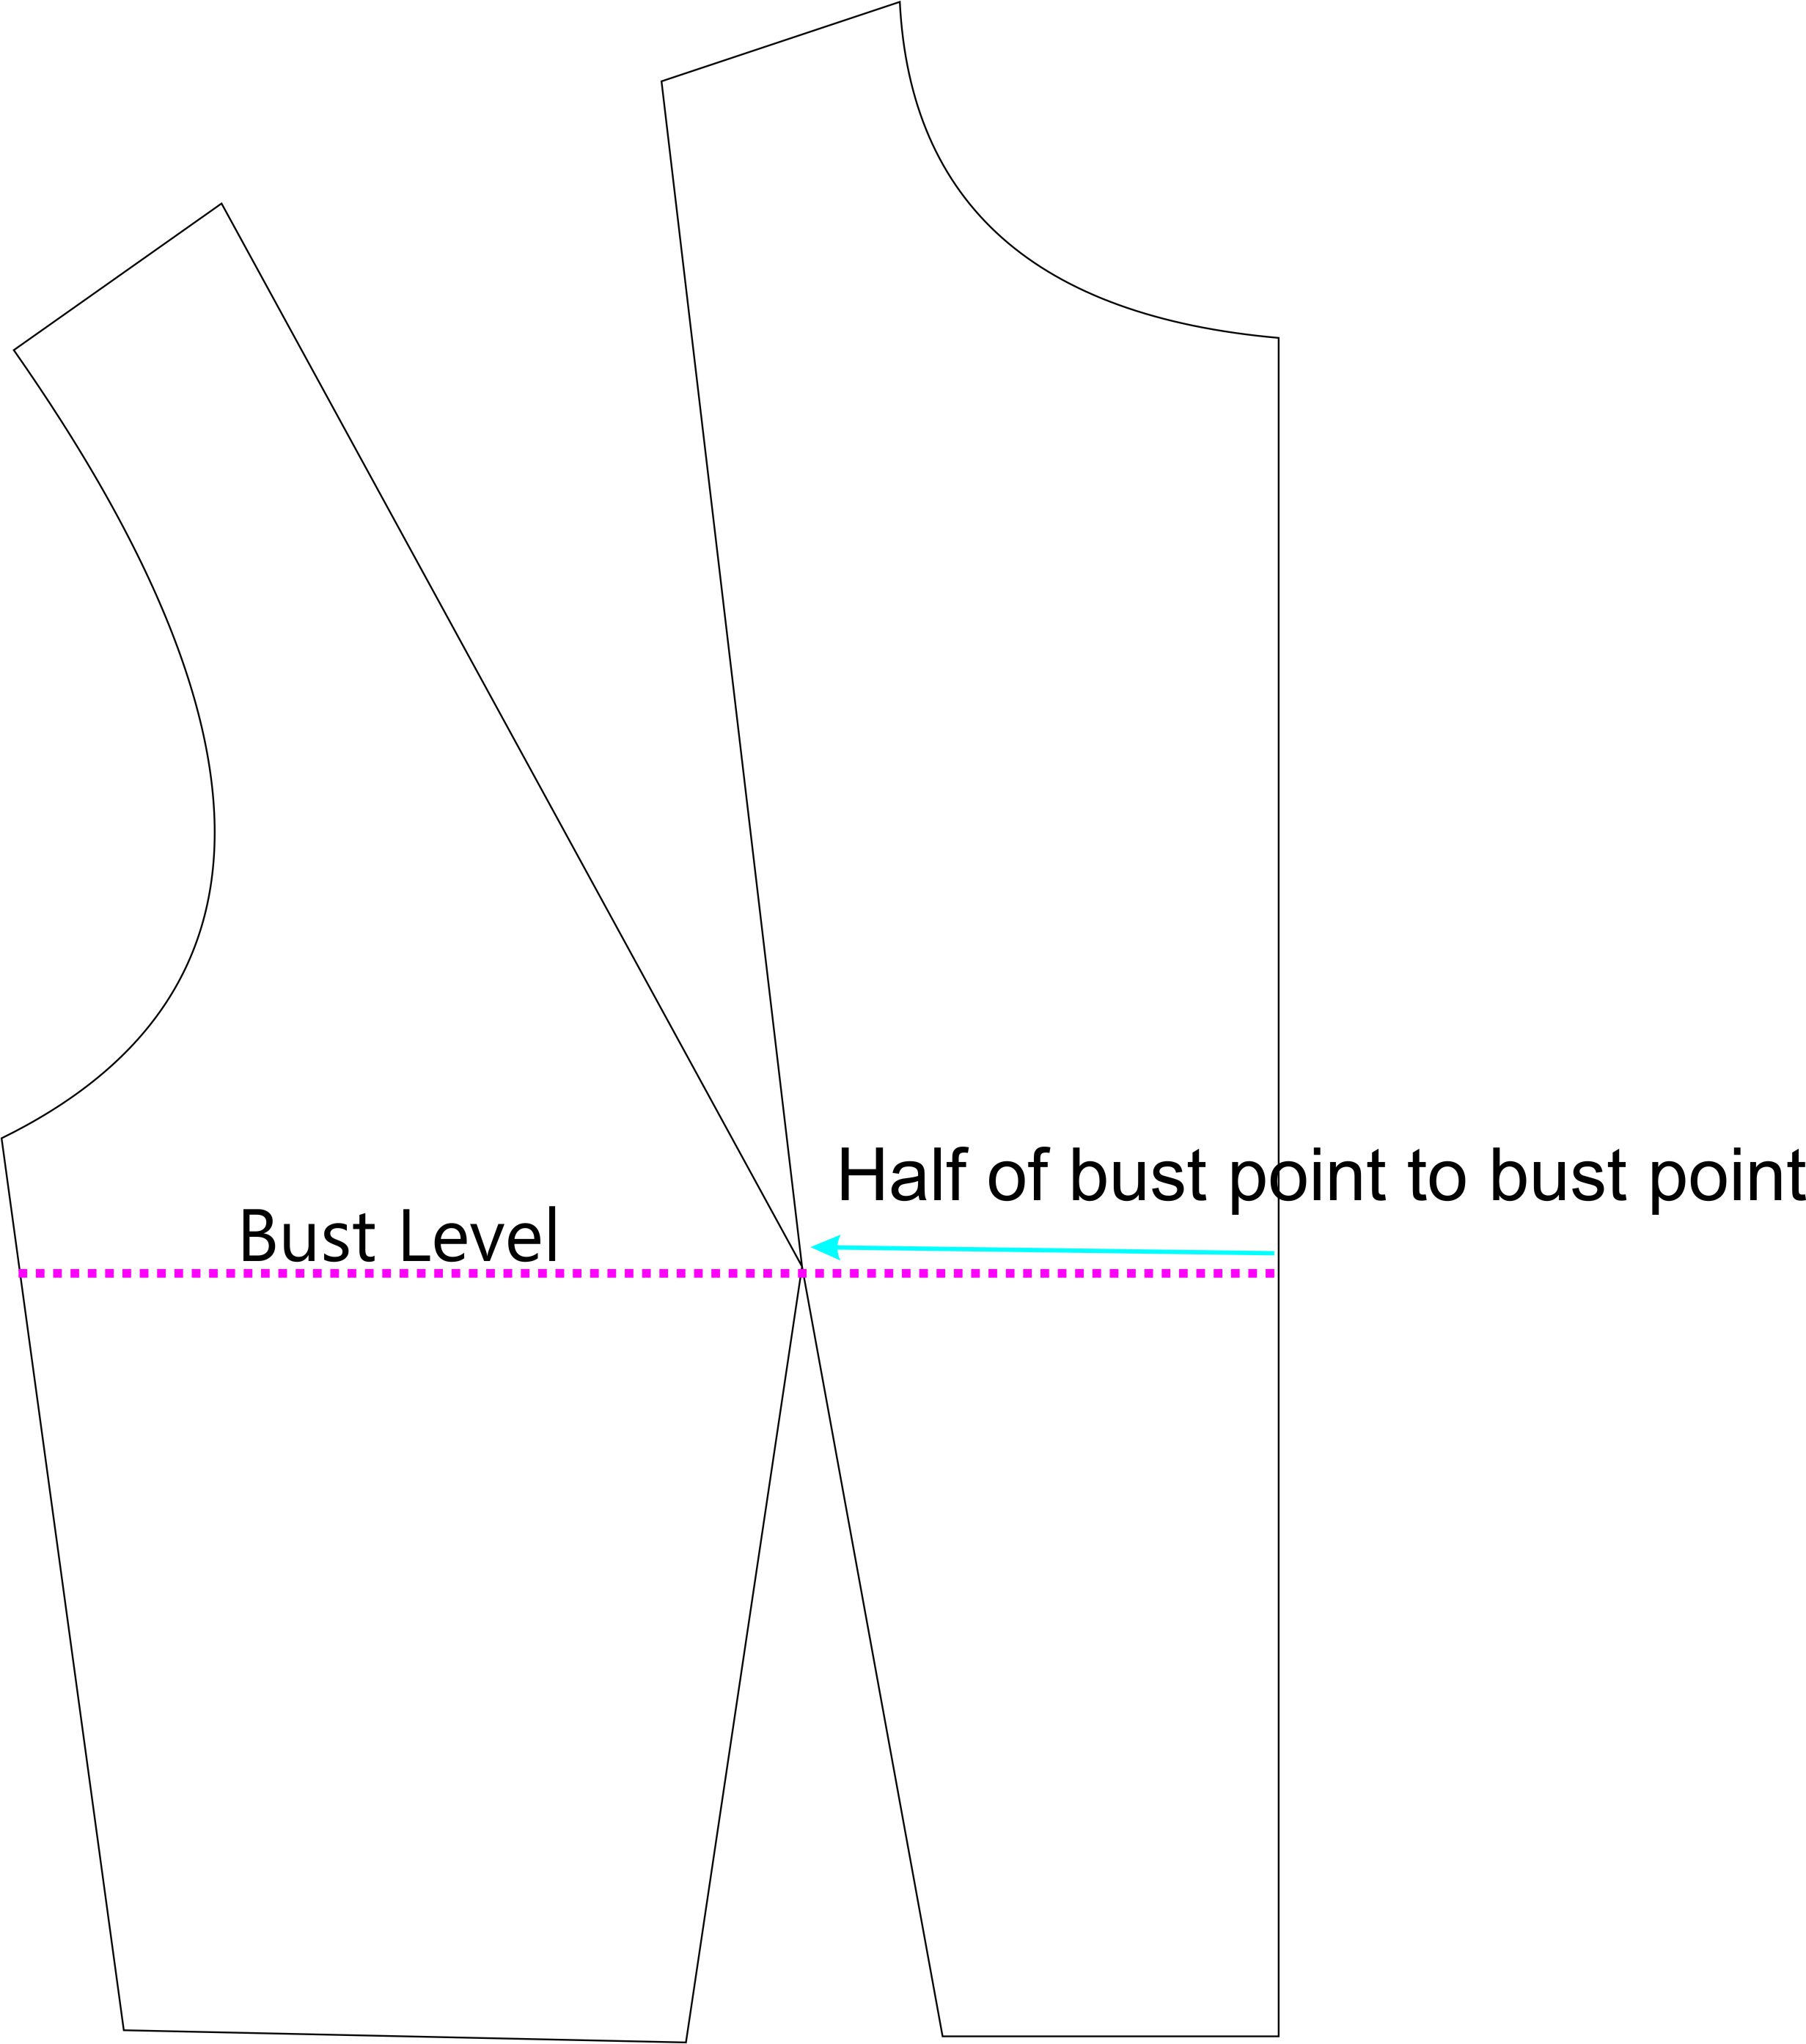 Where to Place the Points of Bust Darts